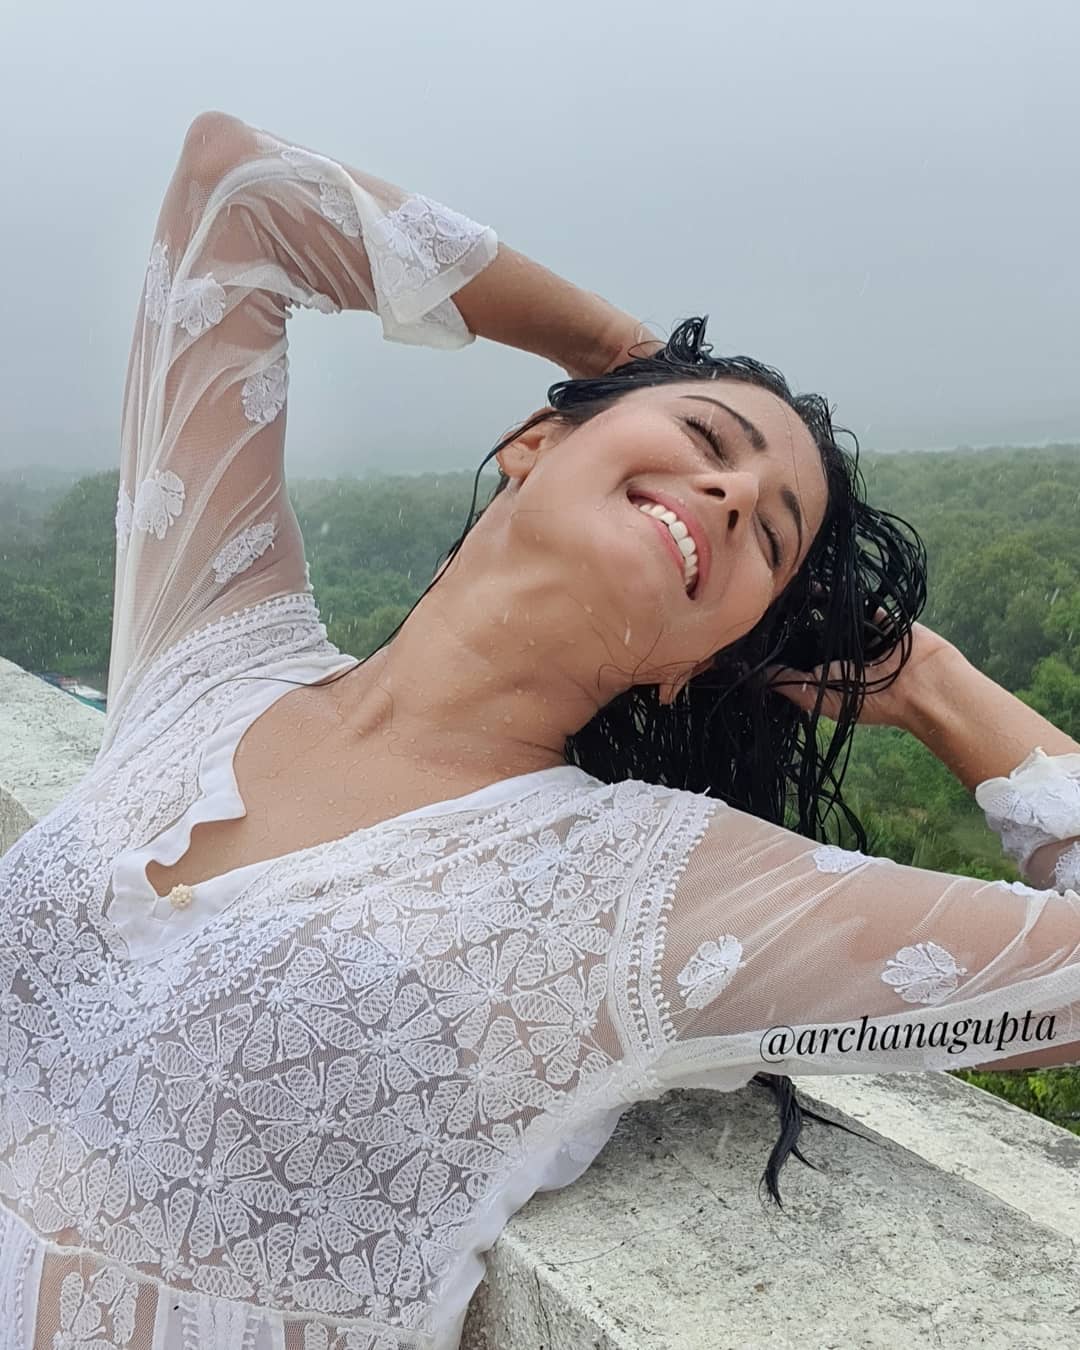 Archana gupta rain dance hot images-Actressarchana, Actress, Archana Gupta, Archanagupta, Tamilactress Photos,Spicy Hot Pics,Images,High Resolution WallPapers Download